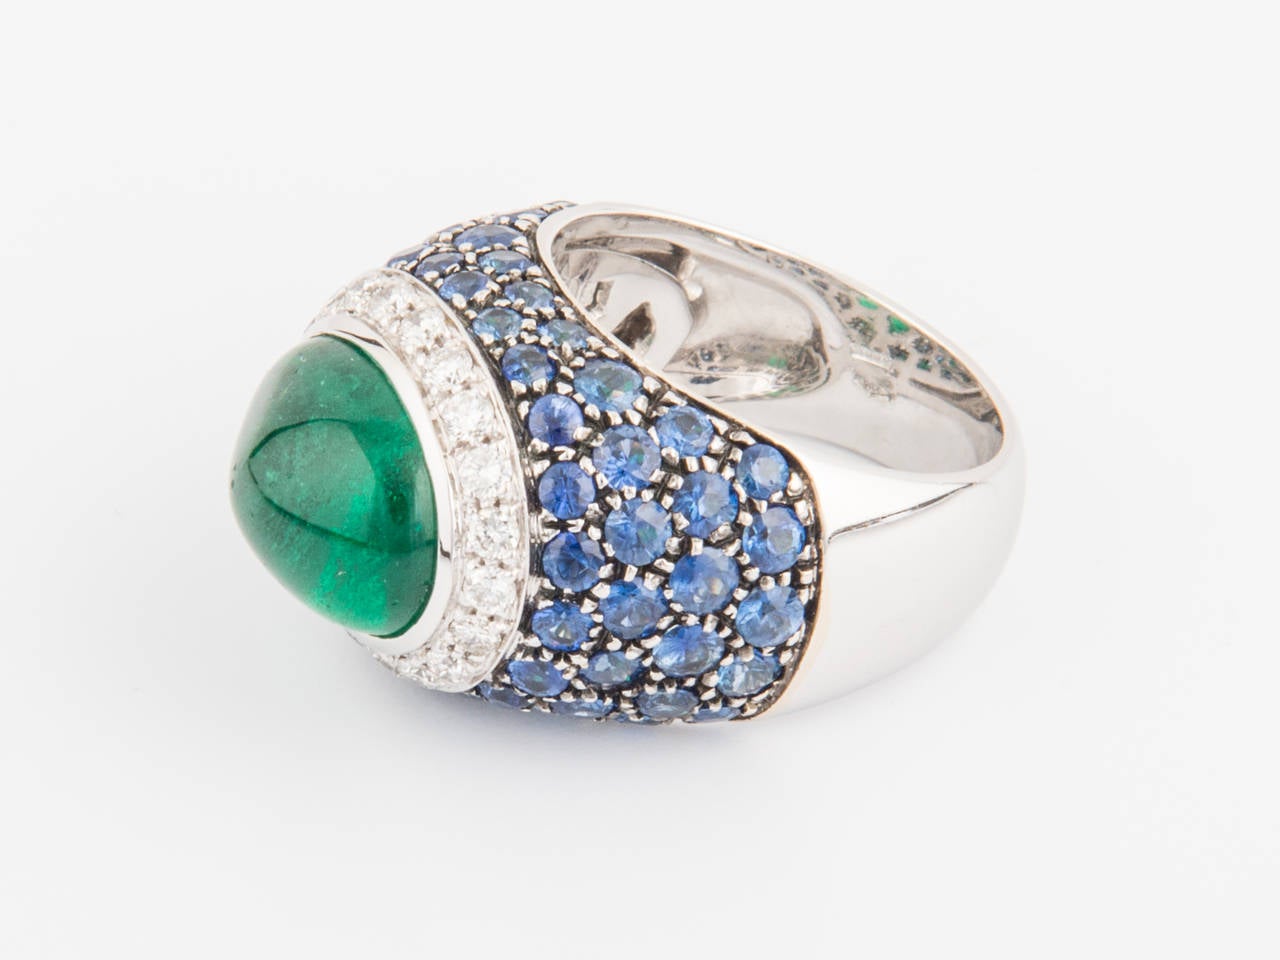 Ring-One of a Kind-18Kt white gold, mounted with a superb Oval Cabochon Emerald weighing 6.77 carats, round diamonds weighing 0.54 carats & round sapphires weighing 3.68 carats.

Finger size 6 1/2 (US size) or 53 1/2 (European size)